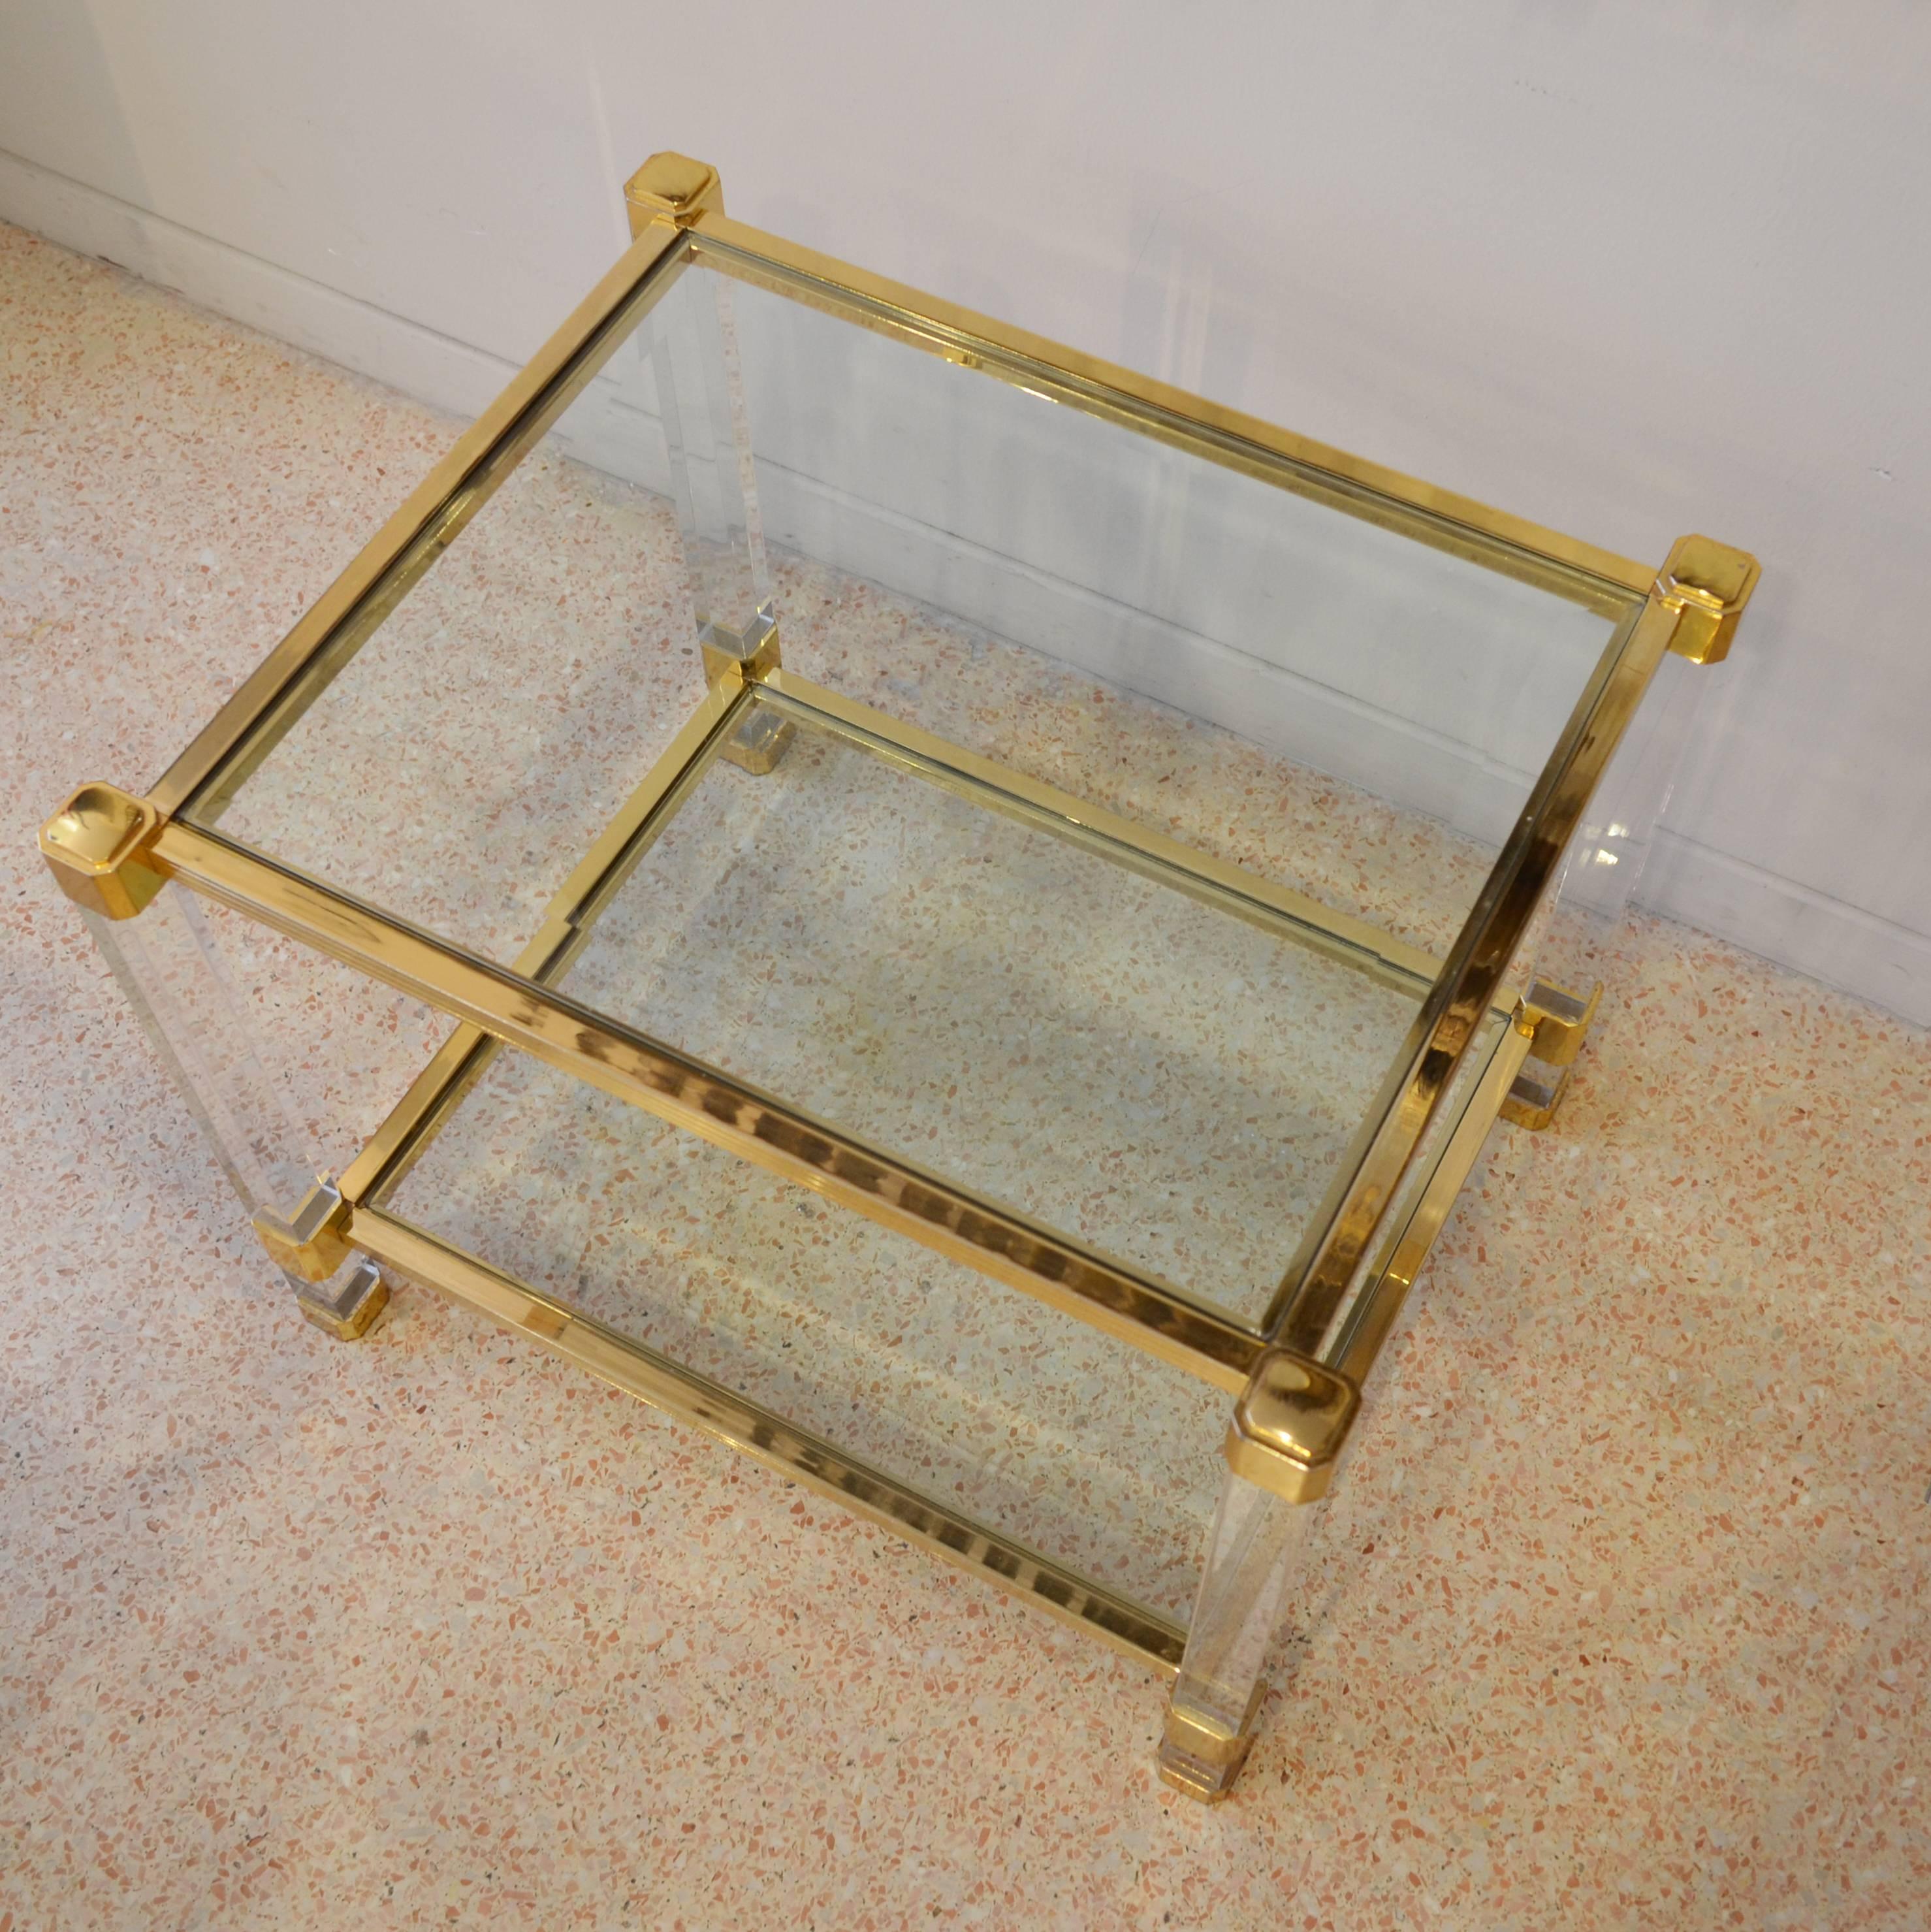 Parisienne table with structure made in brass and plexiglas and double crystal shelves.
Found in Paris, from 1980s in perfect conditions. Ideal to use as coffee tables or bedside tables.

To have a (fast and out of interest) shipment quotation,